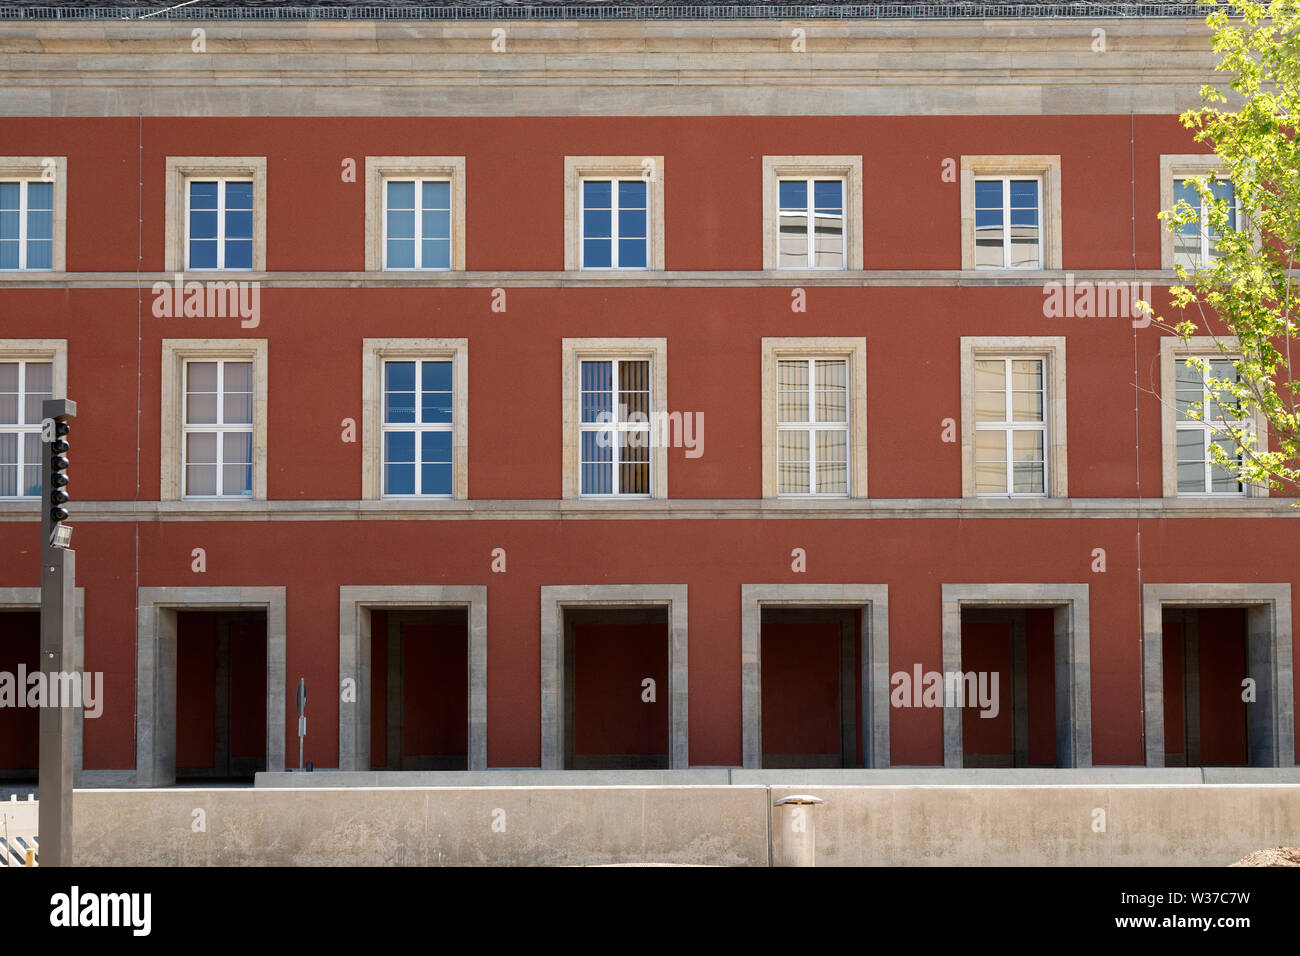 Facade of a Thuringian state government building in Weimar, Germany. The building was designed and built during the Nazi era in the 20th century. Stock Photo